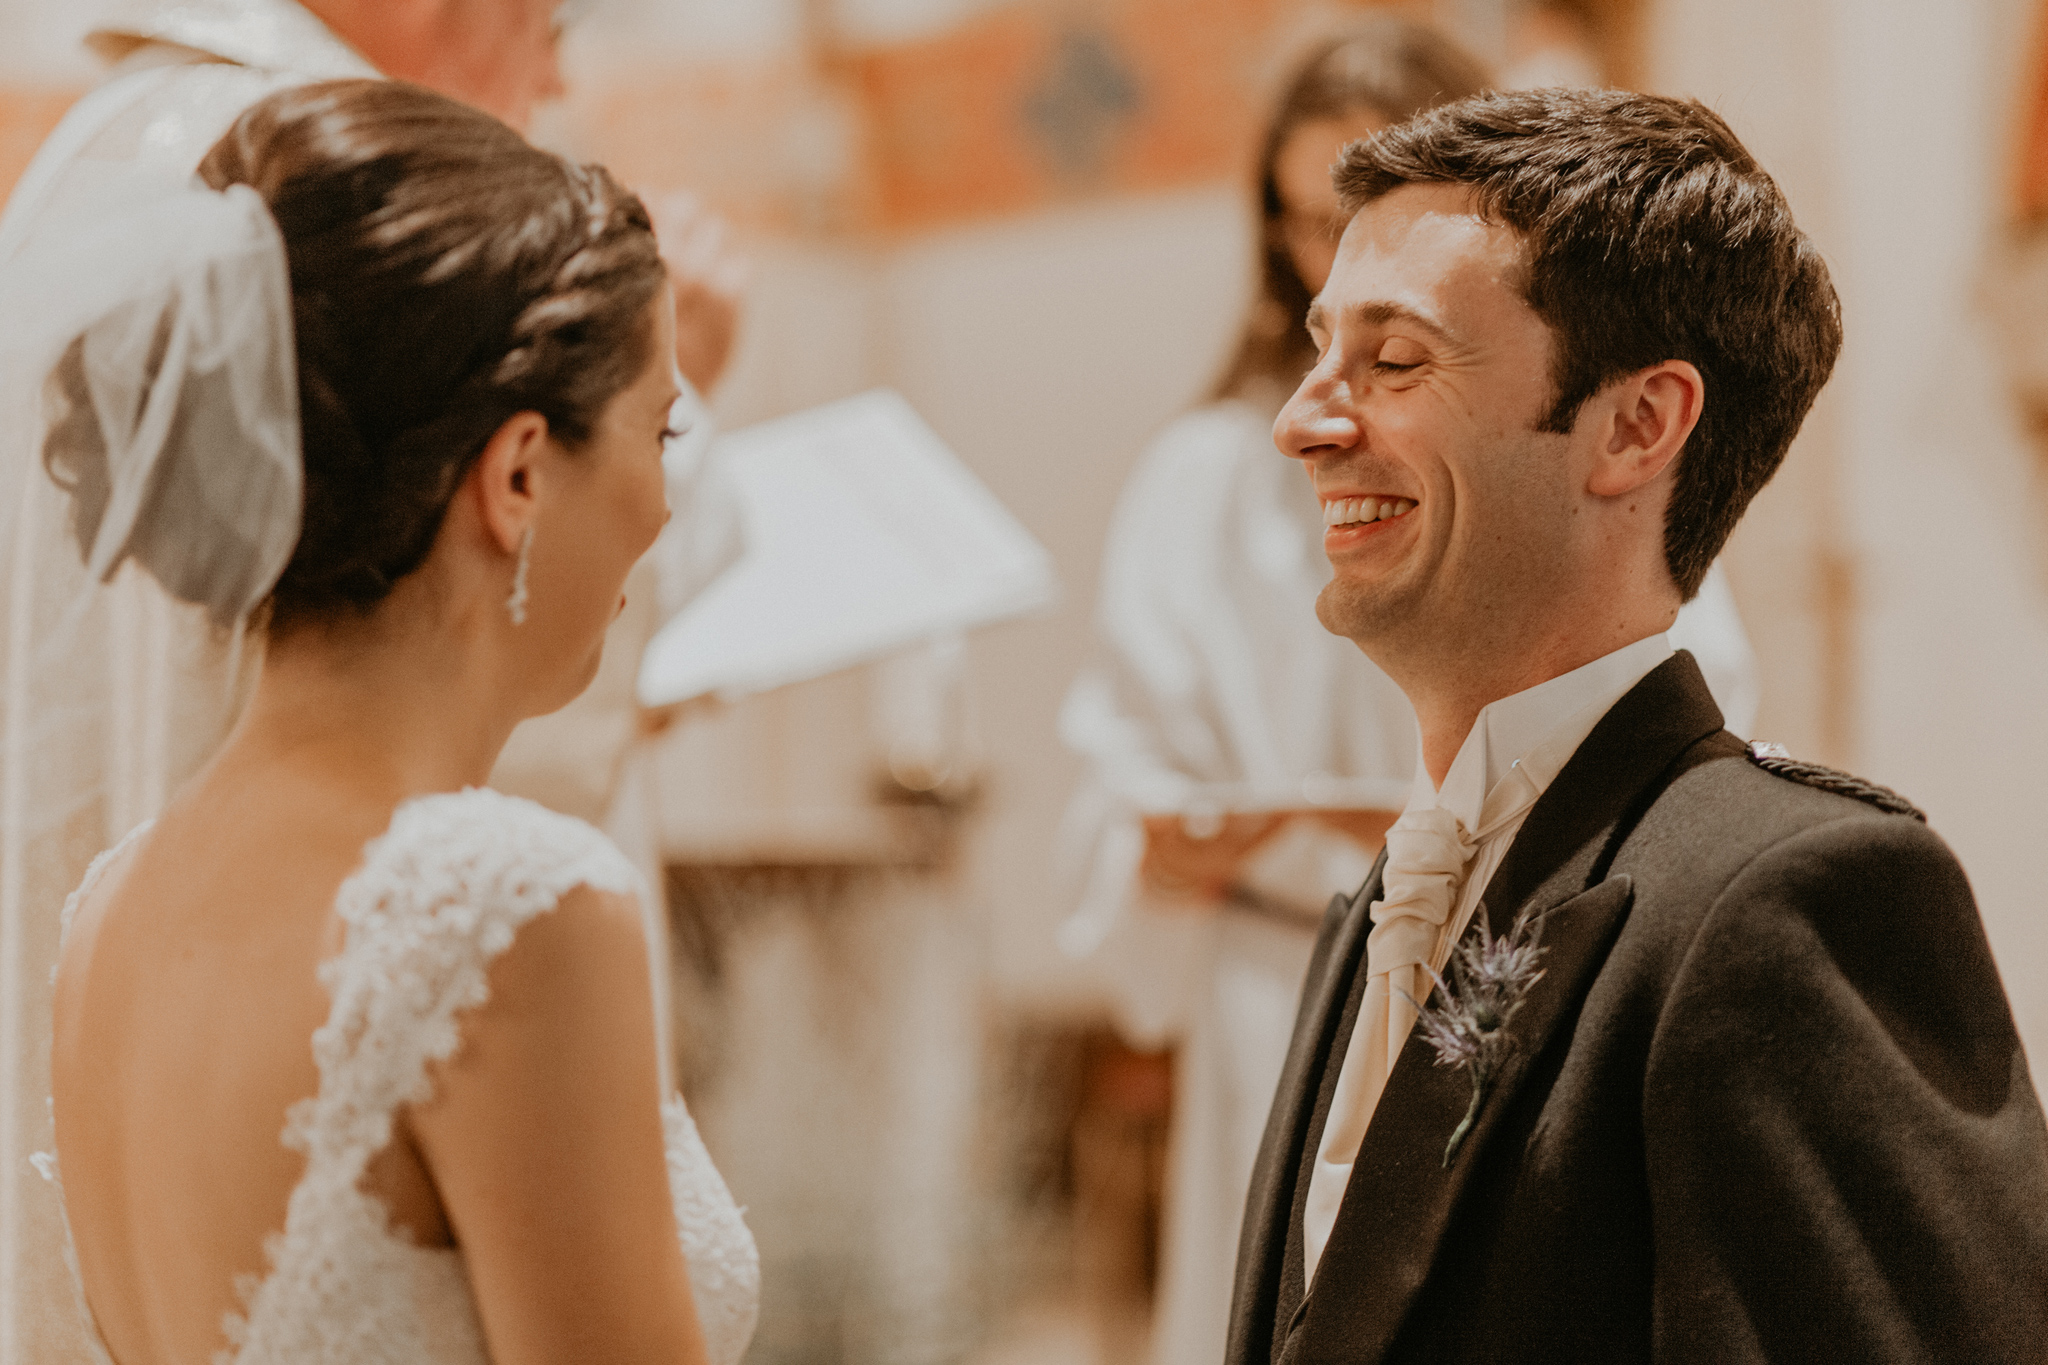 Bride and groom laughing during church wedding ceremony